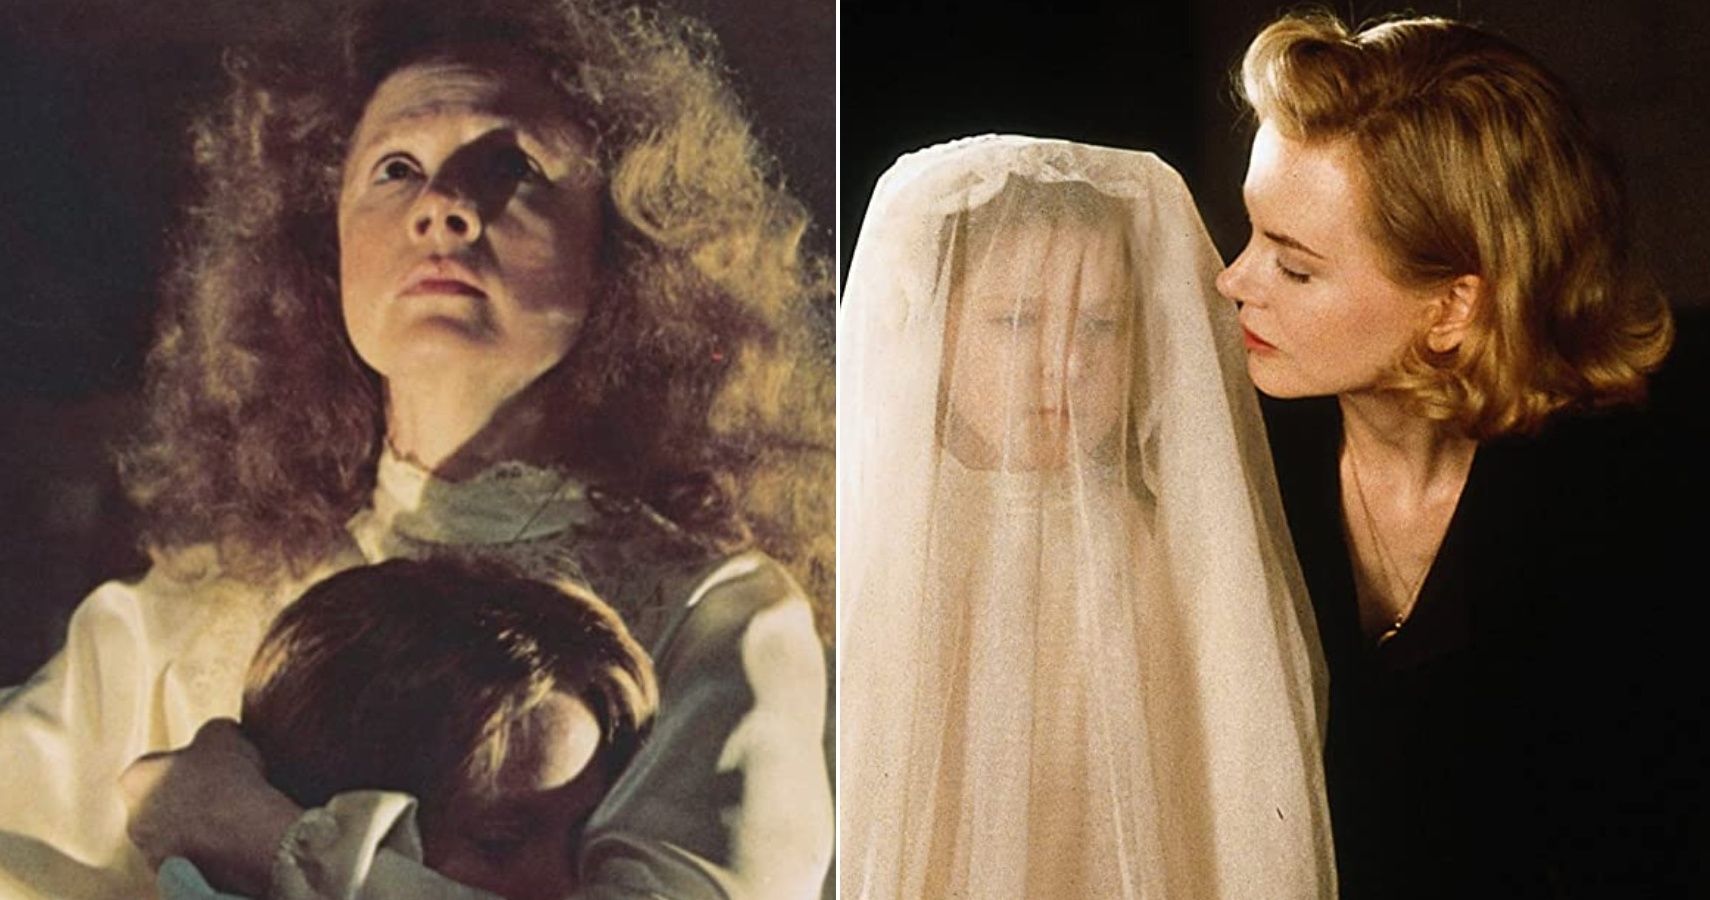 The 10 Best Supernatural Horror Movies, According To IMDb